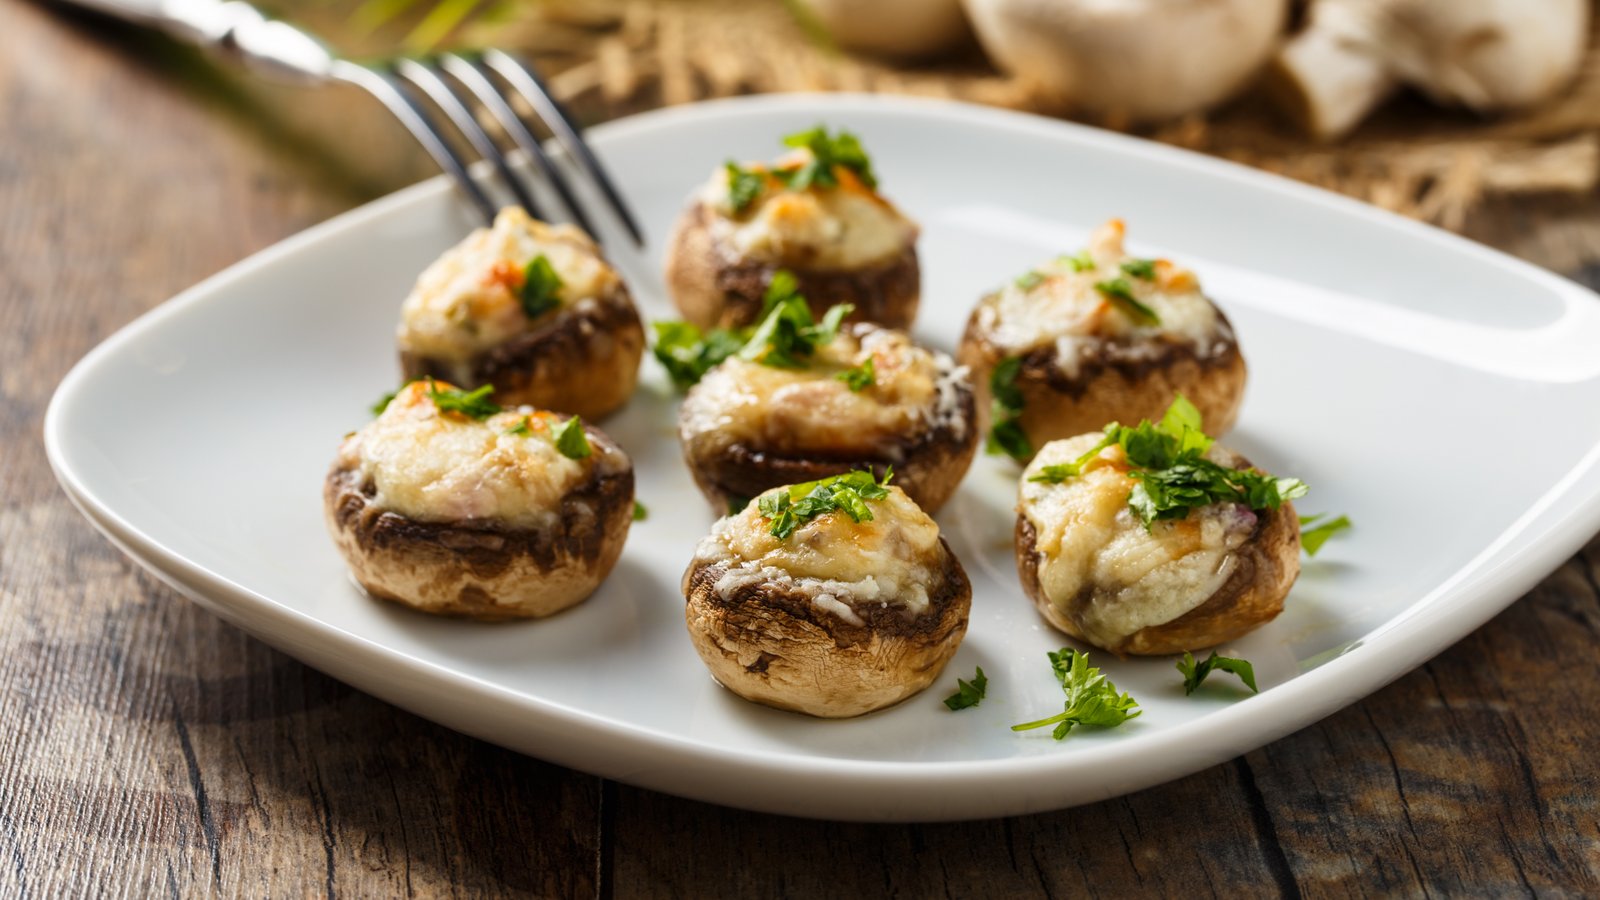 Grilled Stuffed Mushrooms Recipe With Onion Parmesan & Herbs